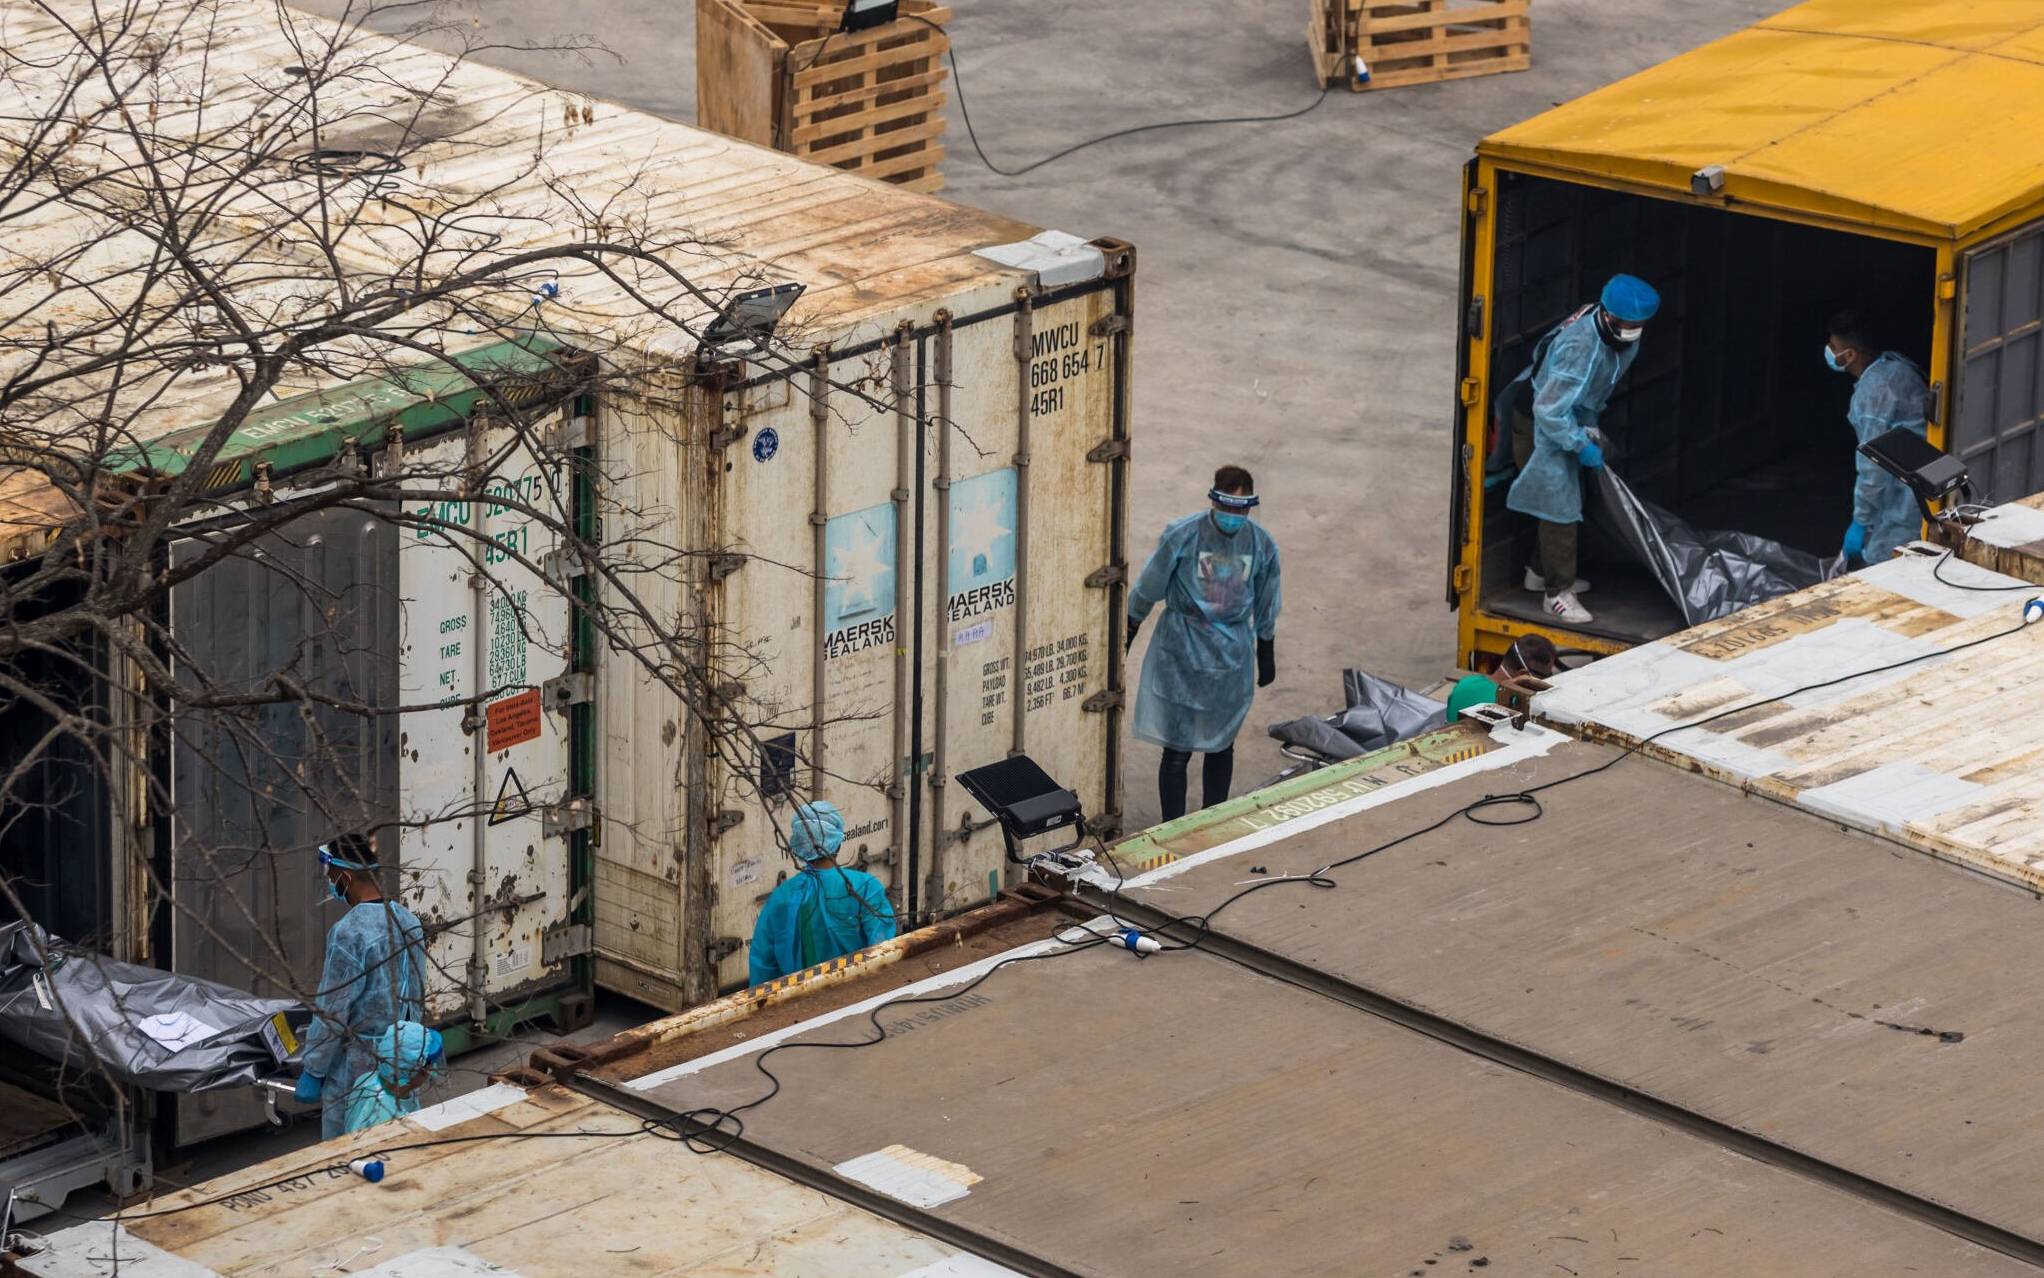 Workers move the bodies of deceased people from a truck into a refrigerated container at the Fu Shan Public Mortuary in Hong Kong on March 16, 2022, amid the city's worst-ever Covid-19 coronavirus outbreak that has seen overflowing hospitals and morgues and a frantic expansion of the city's spartan quarantine camp system. (Photo by DALE DE LA REY / AFP)